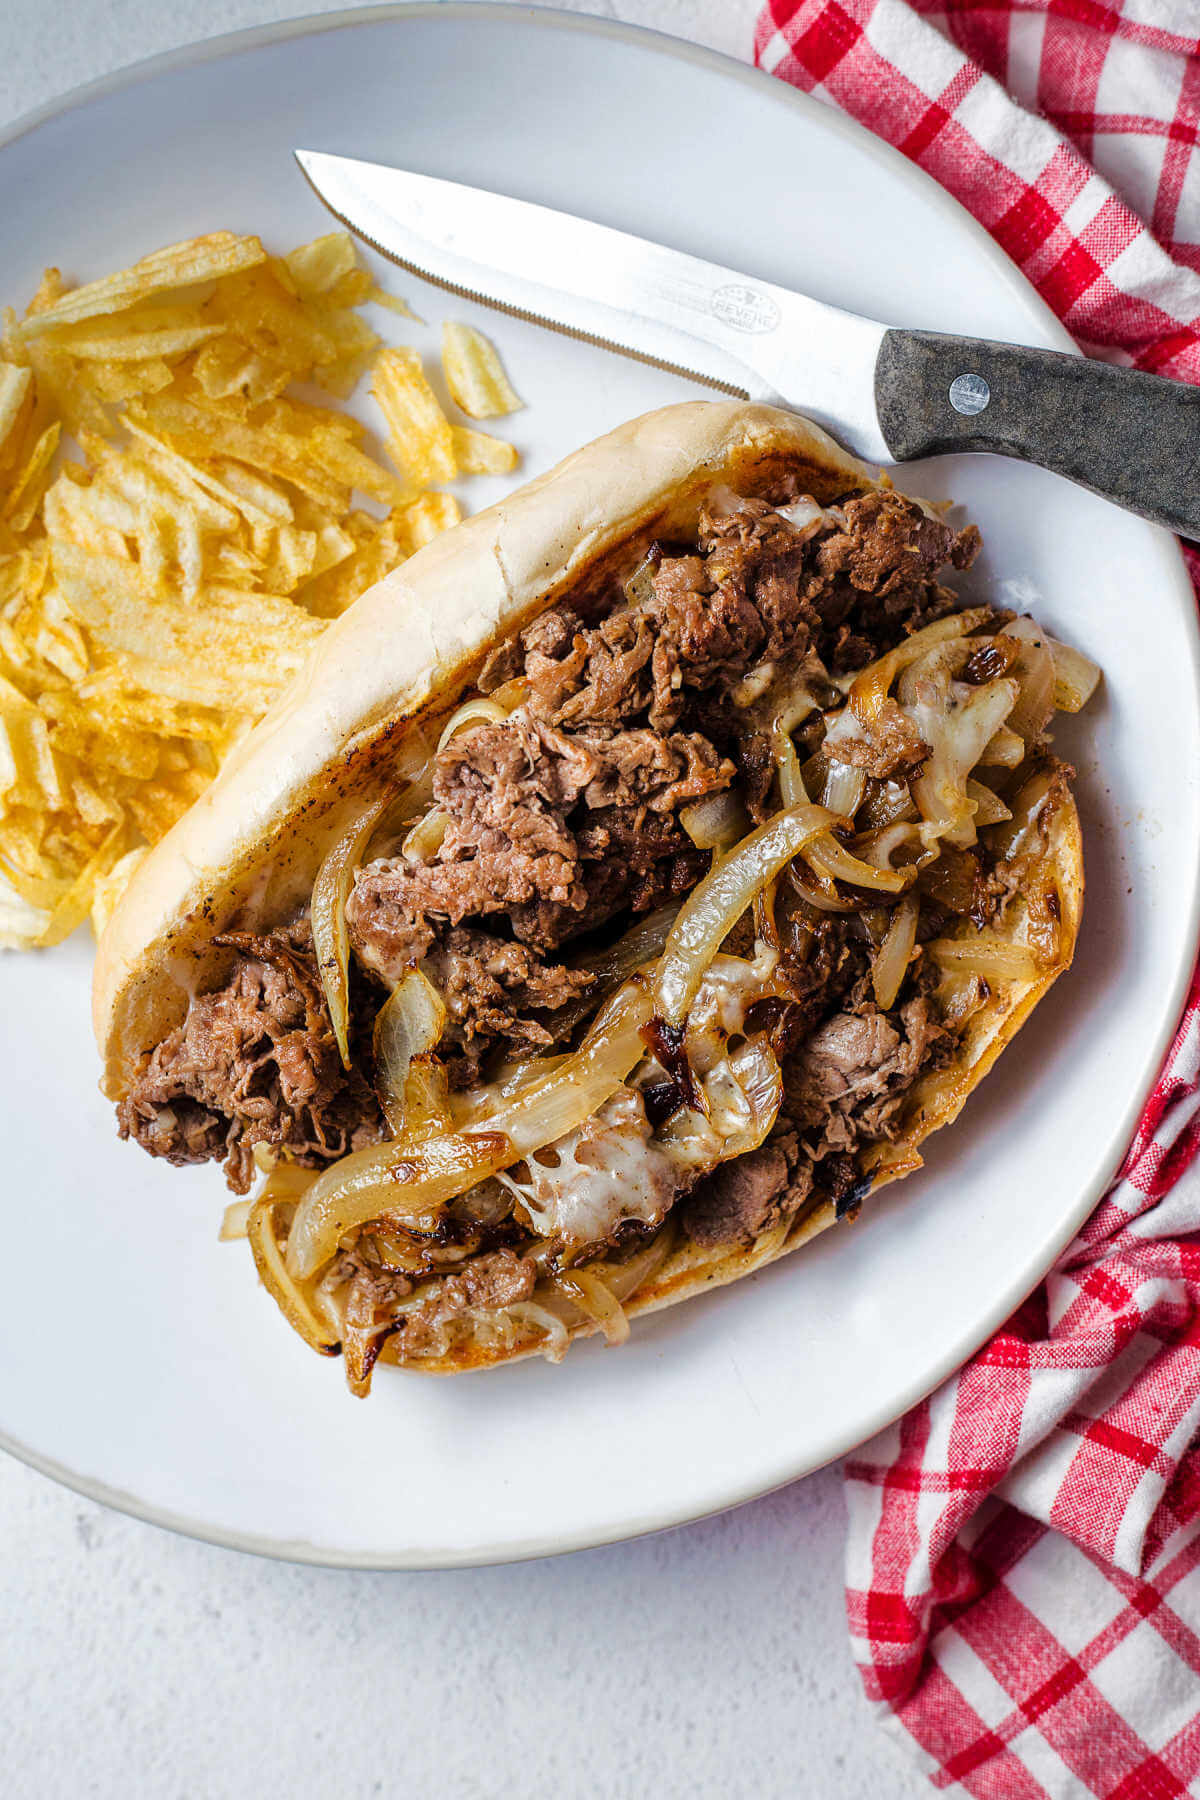 a philly cheesesteak sandwich on a white plate with potato chips and a steak knife.